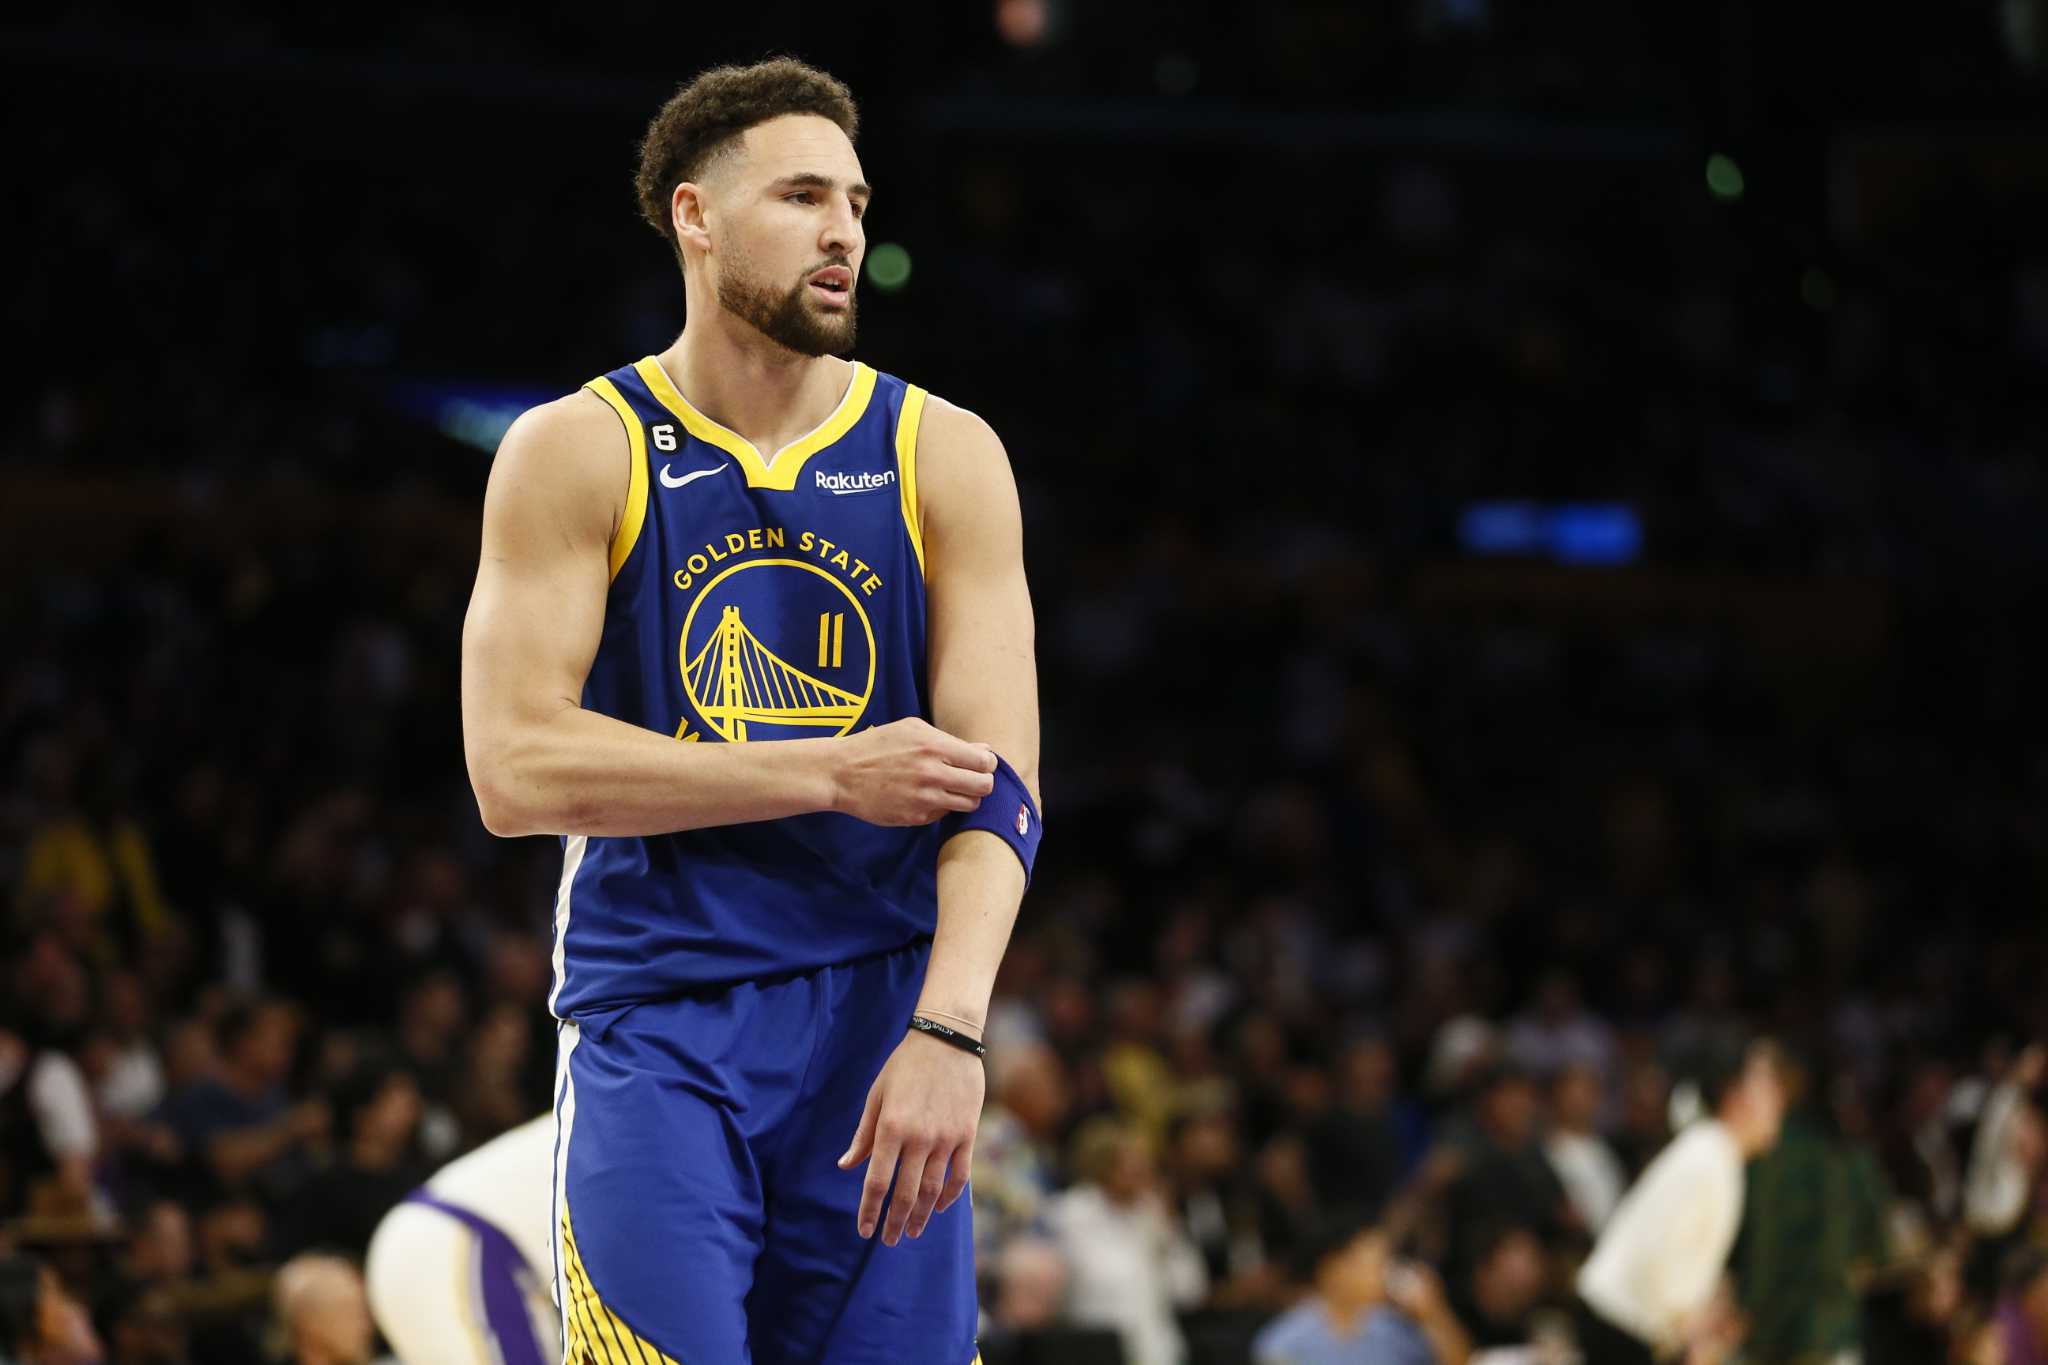 Thompson: The return of 'Game 6 Klay' and the persistence that